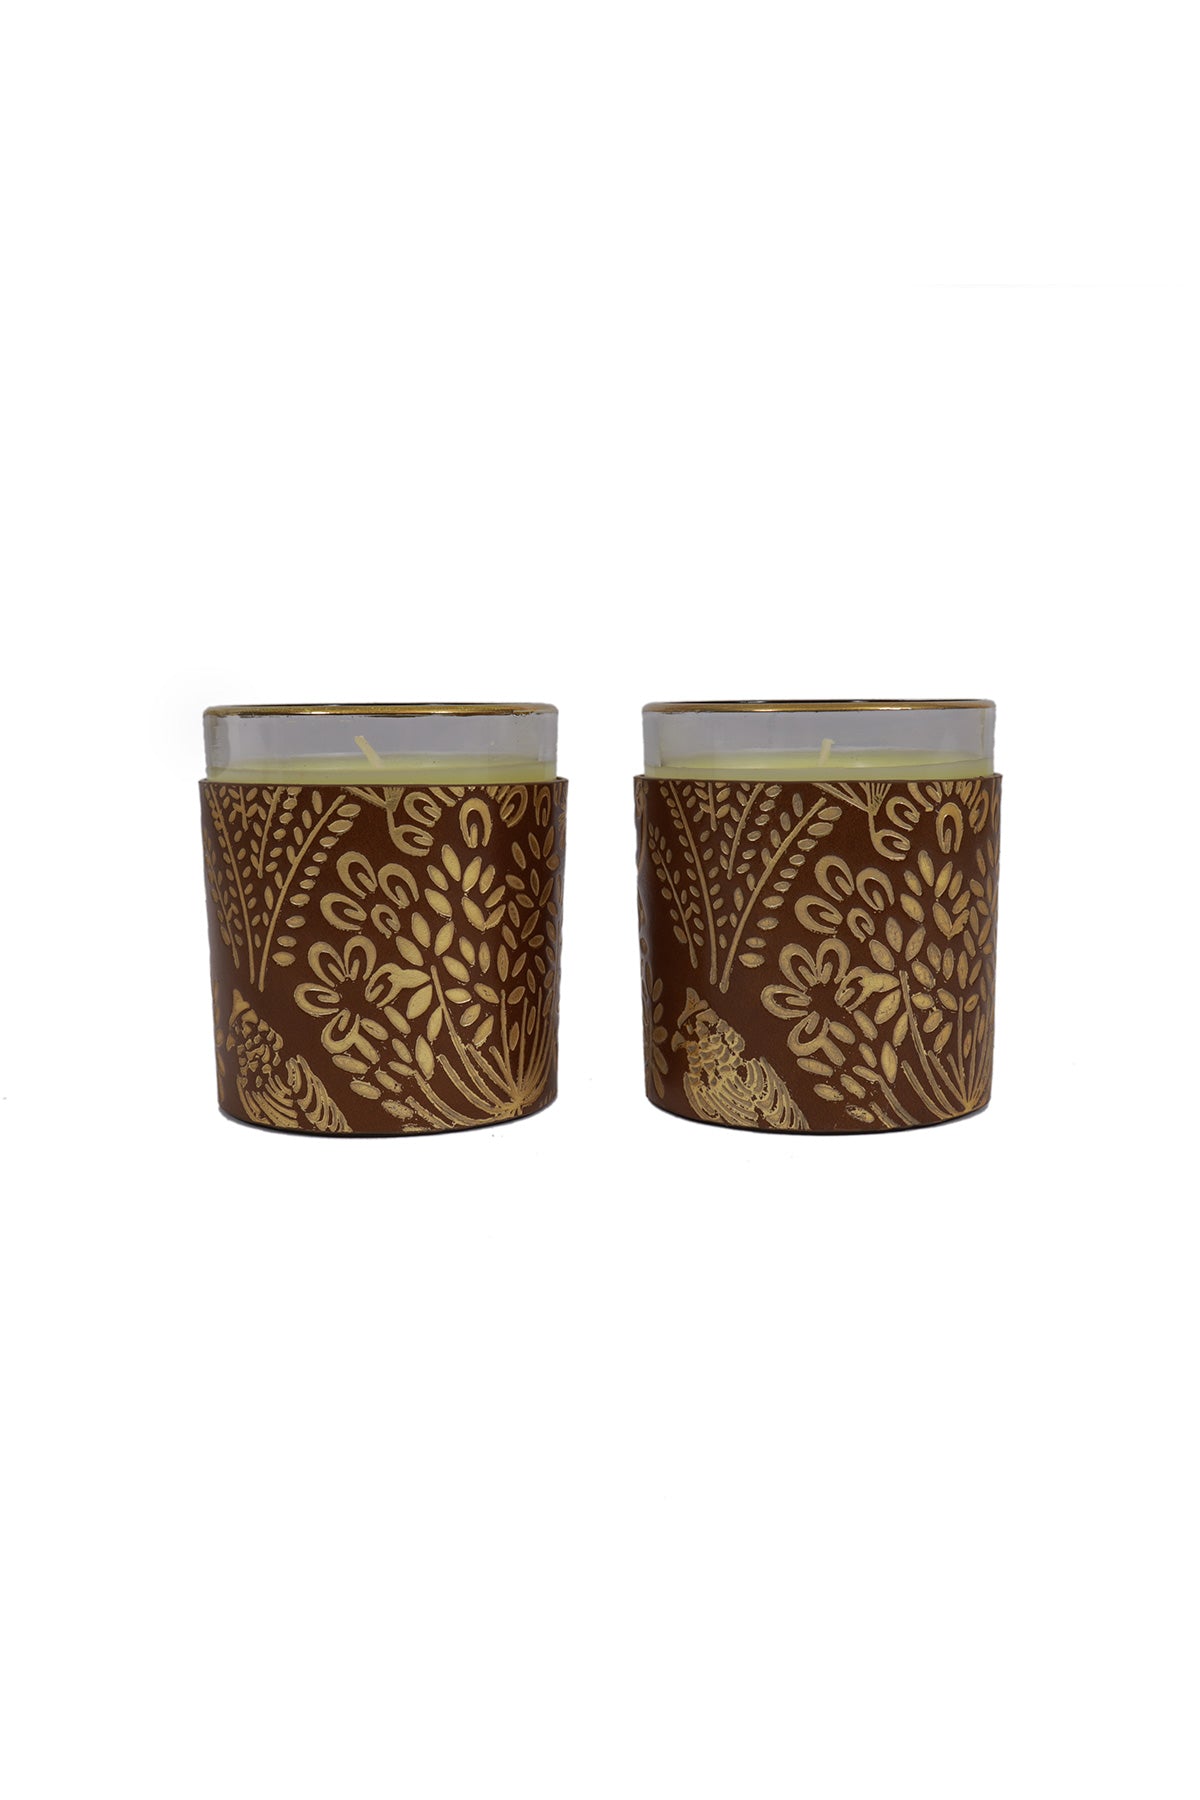 White Musk & Silk Candle (Set of 2)